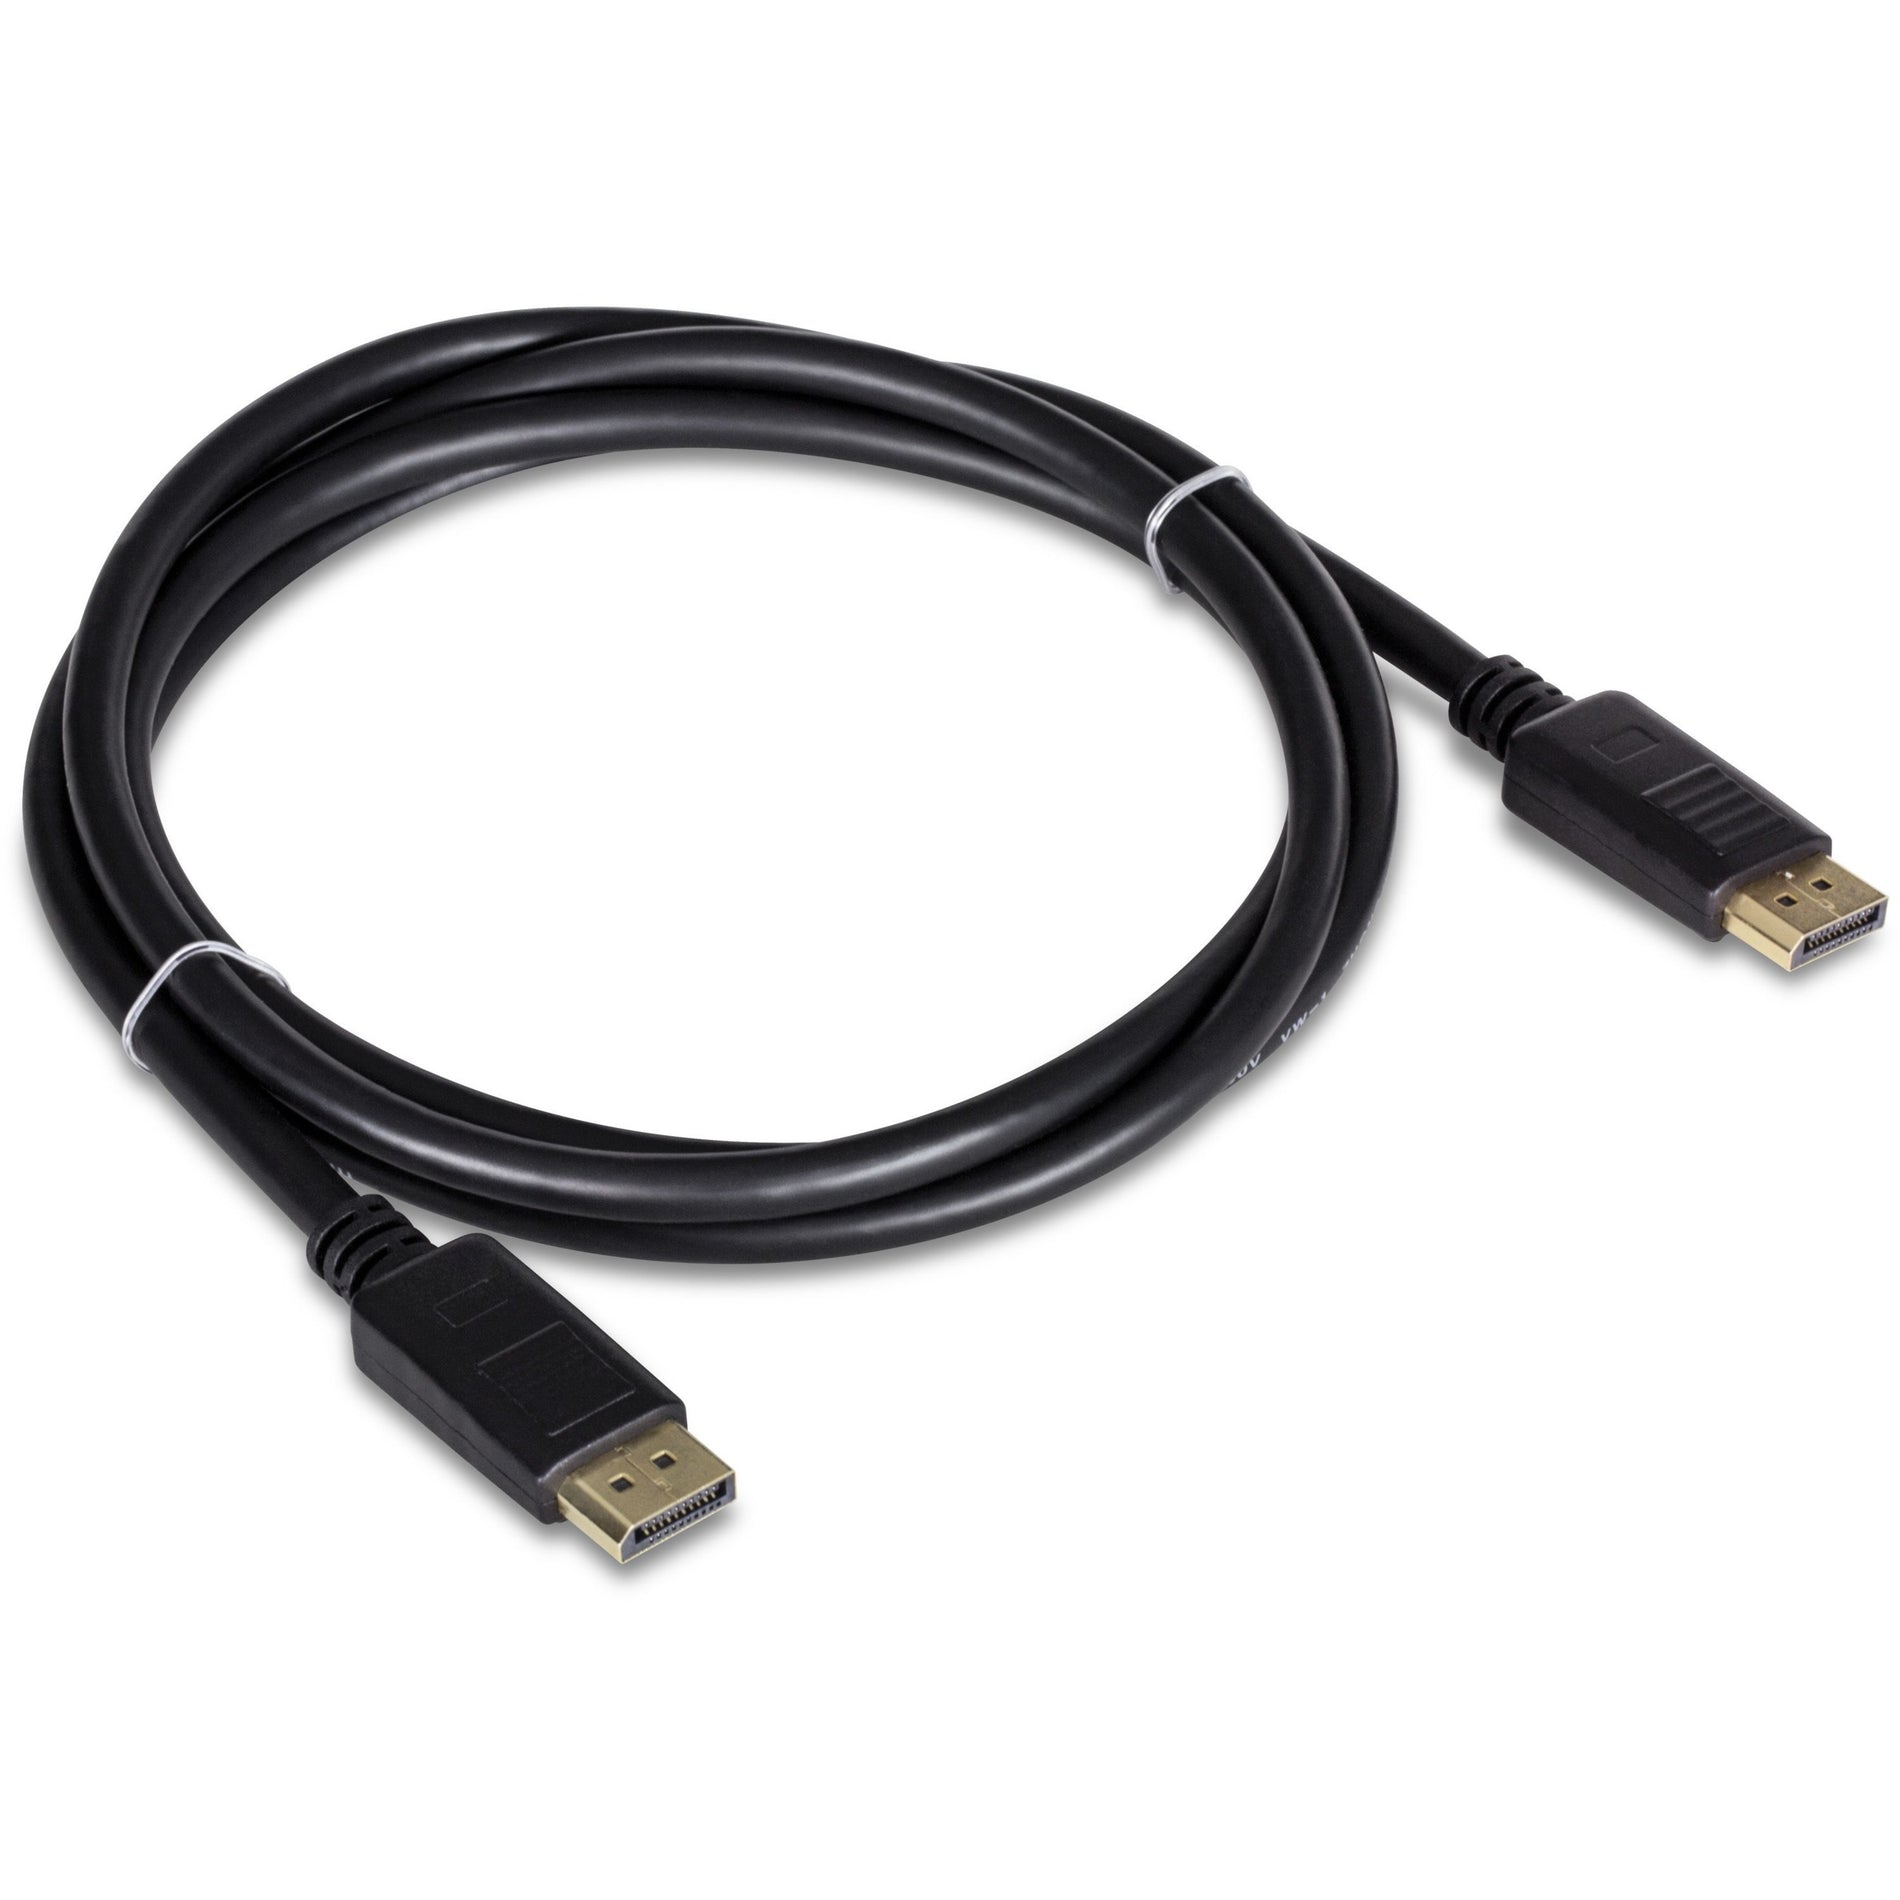 TRENDnet TK-DP06/2 6 ft. DisplayPort 1.2 Cable, 2-Pack, Supports up to 2560 x 1440 @ 144Hz, Black